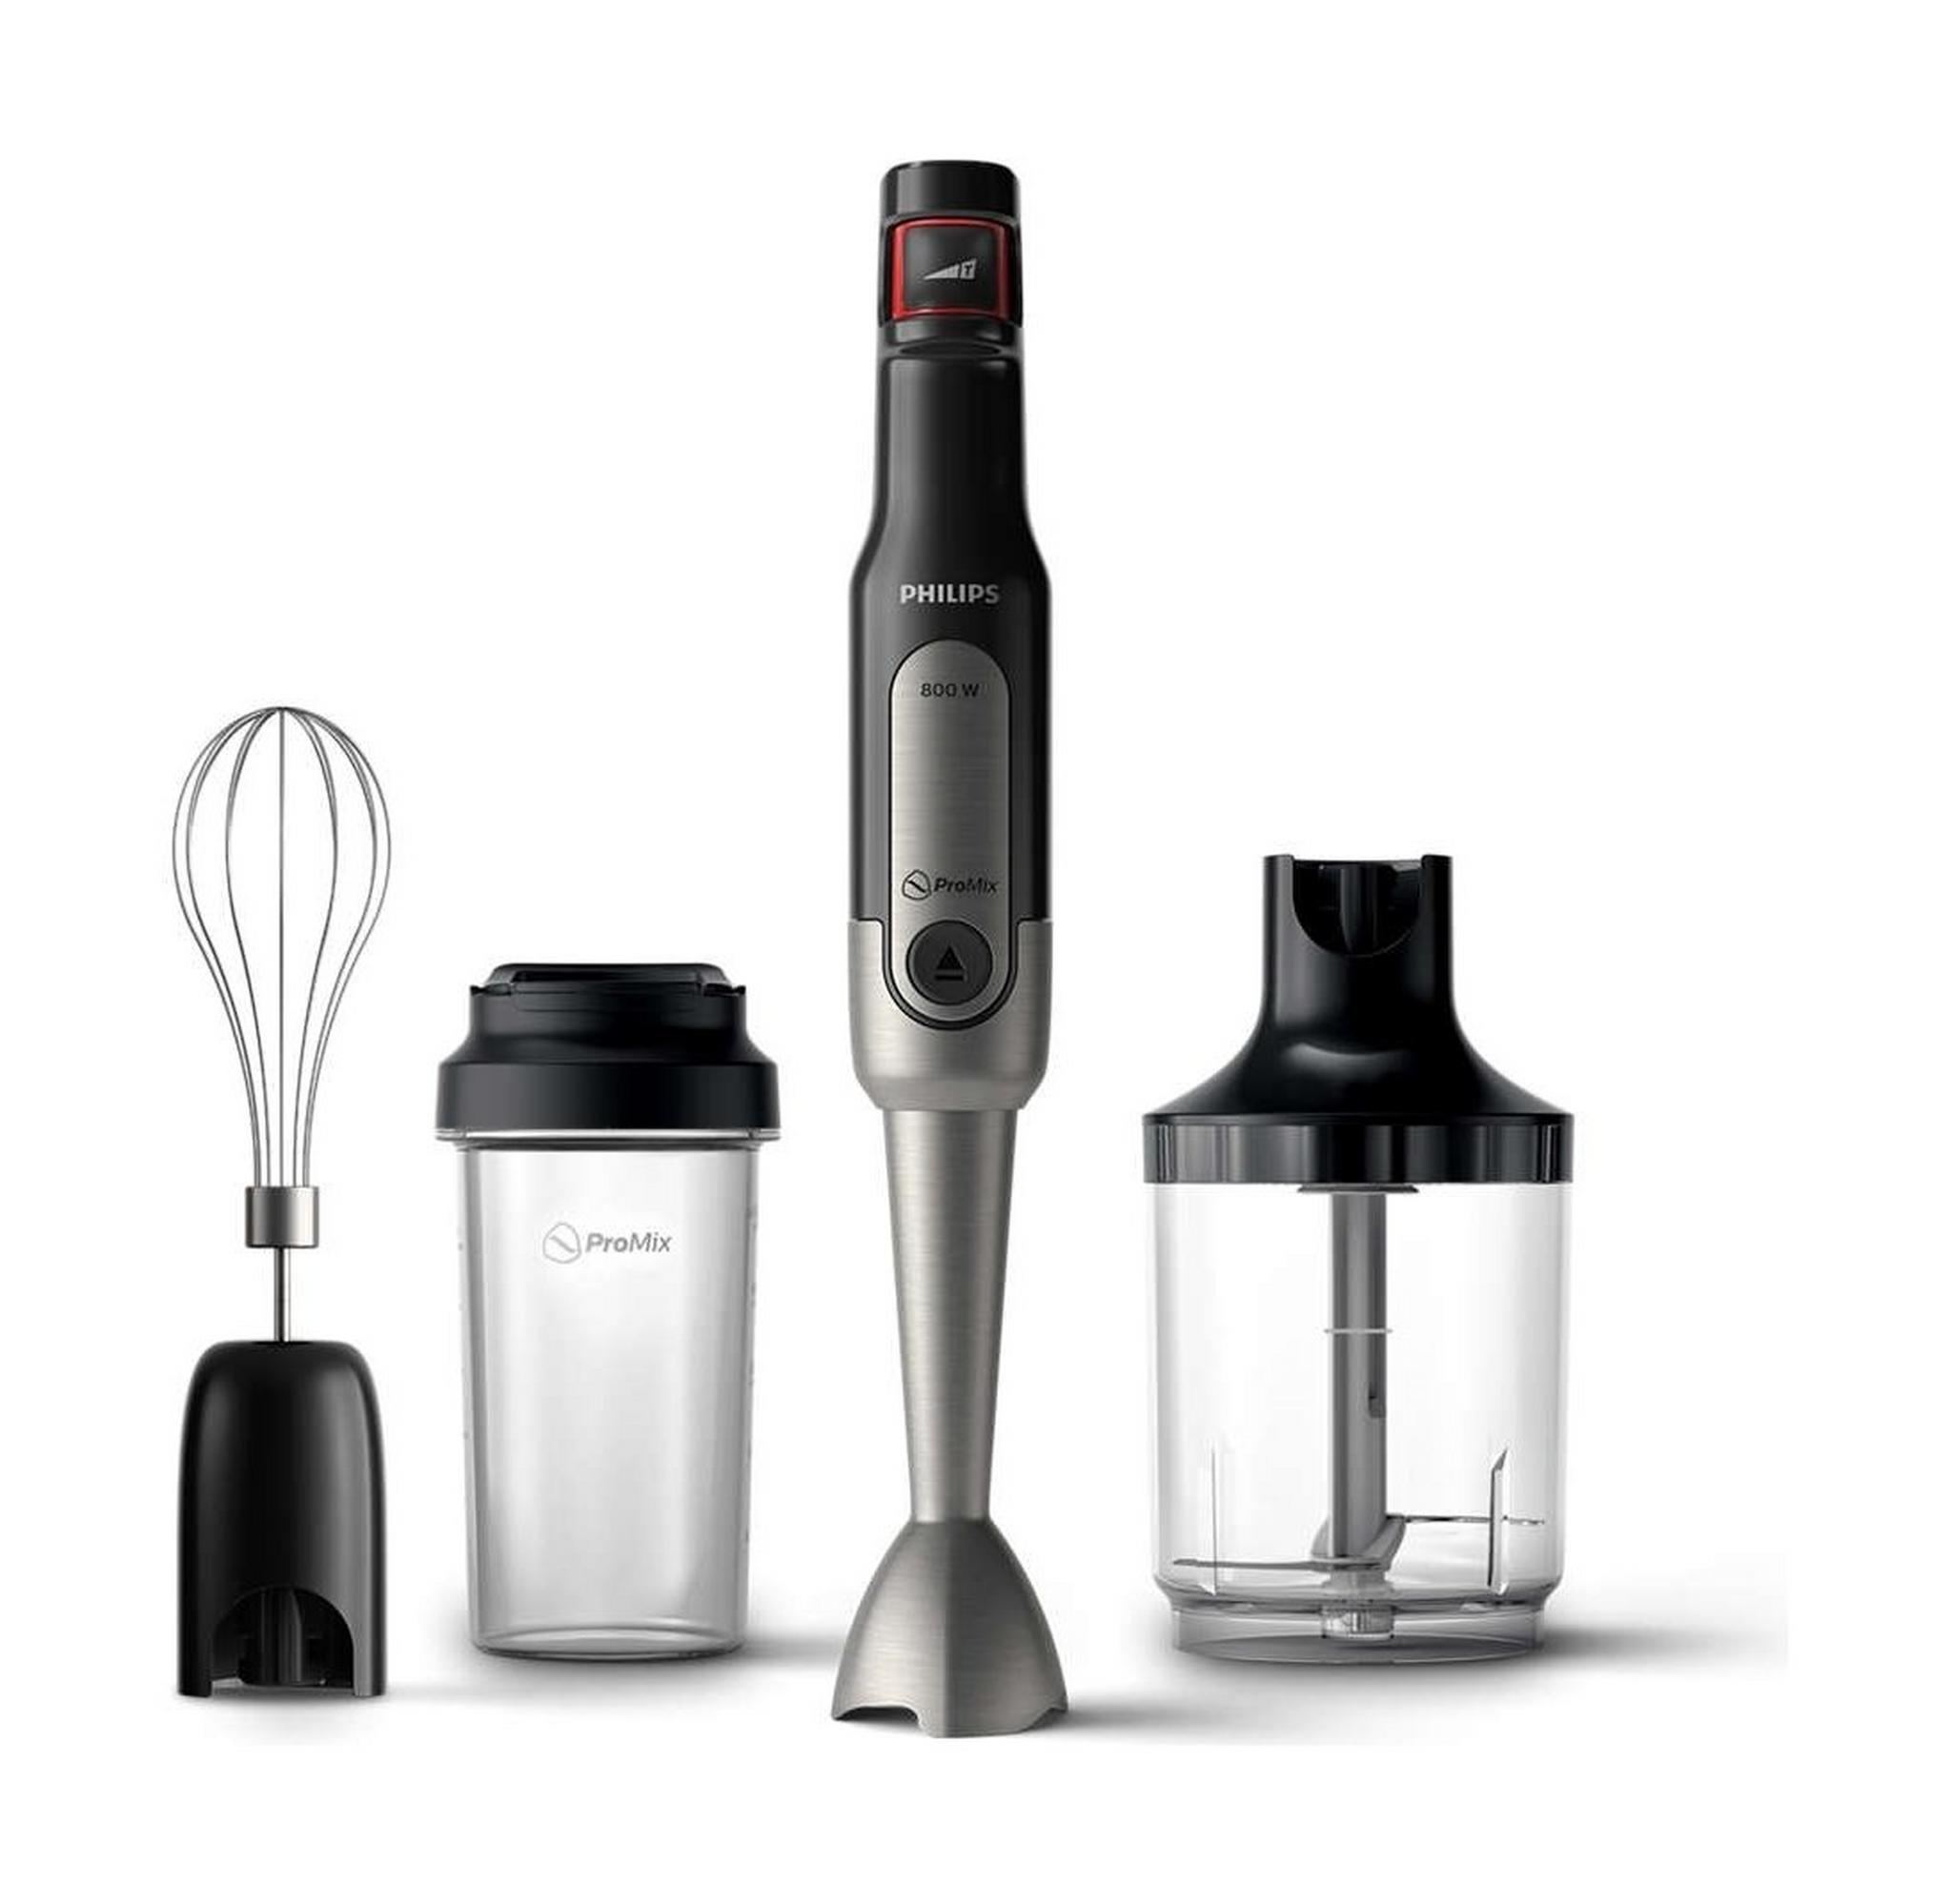 Philips ProMix Hand blender with Chopper and Whisk, 800W, HR2652/91 - Black